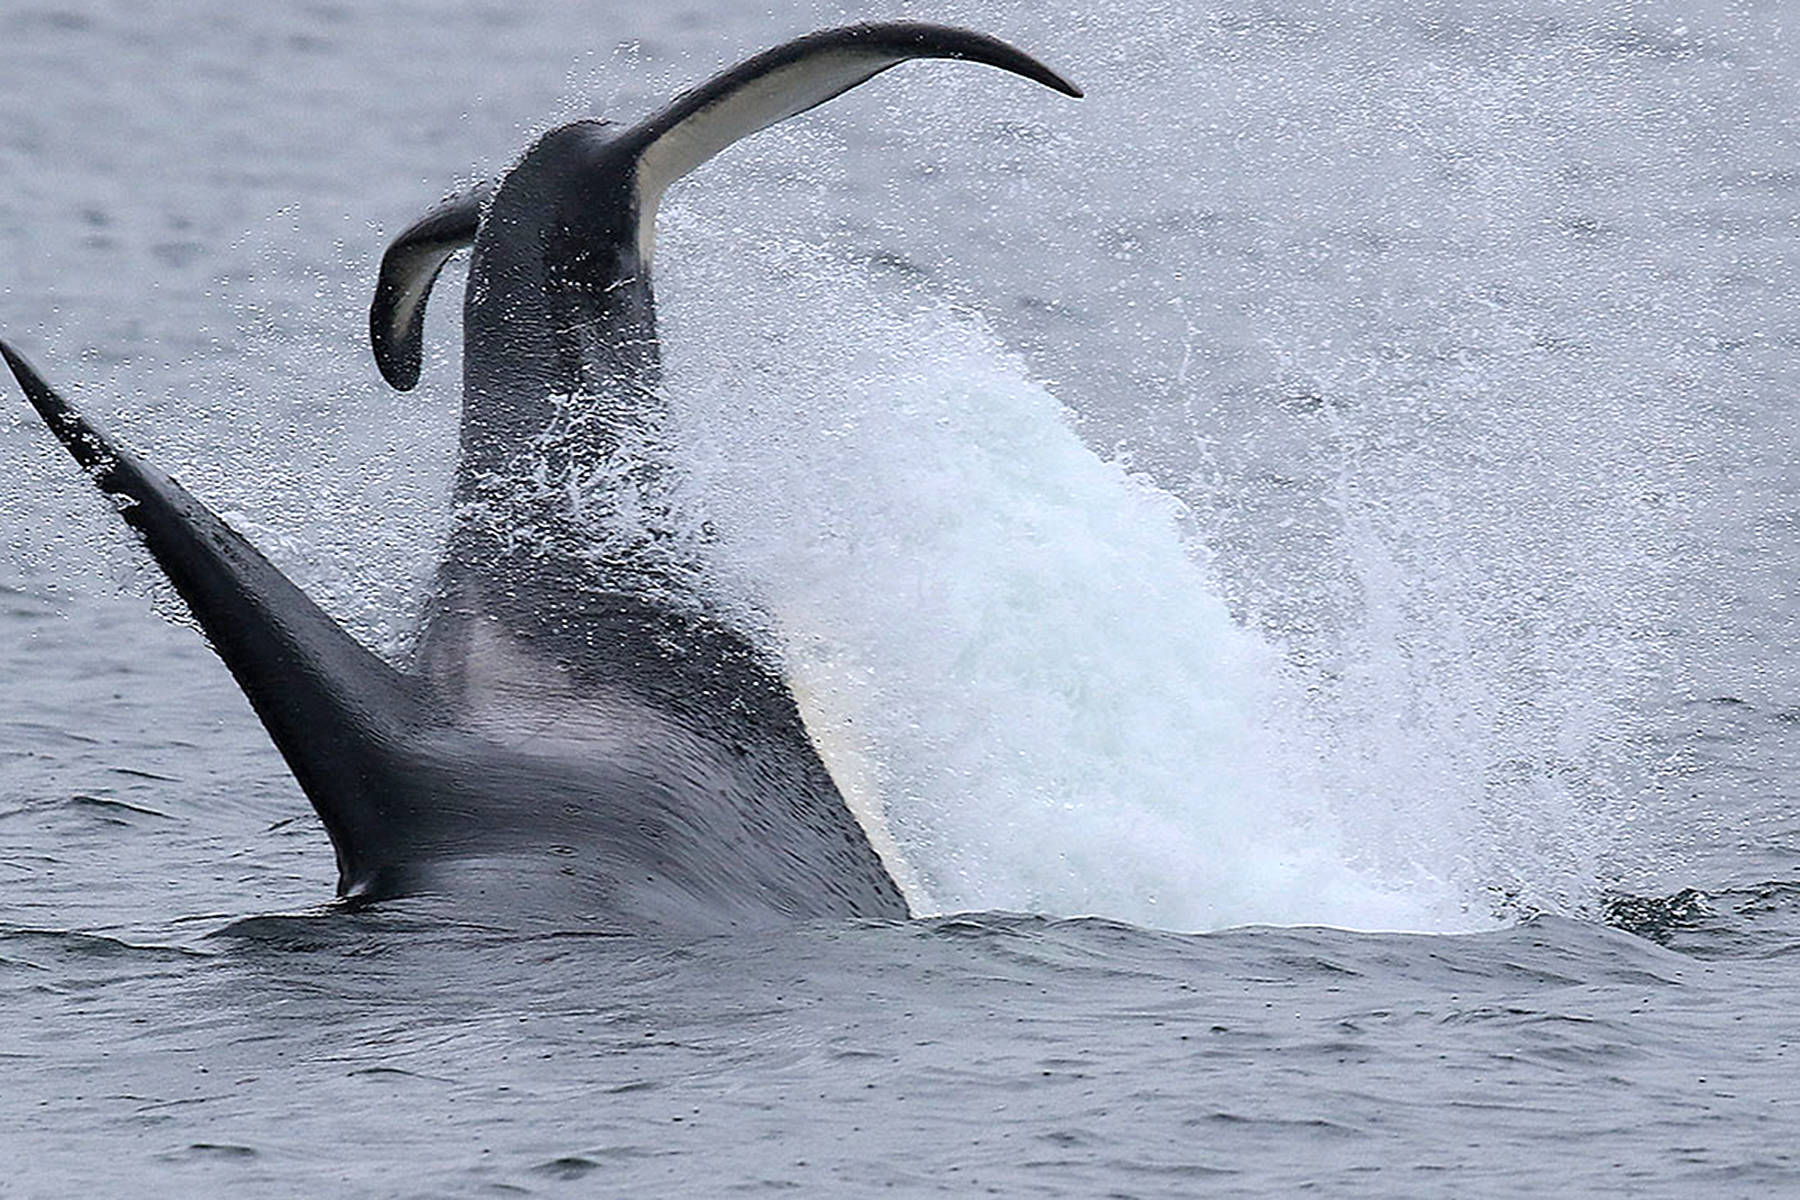 Whale-on-whale feasting ‘unusual’ for Whidbey waters